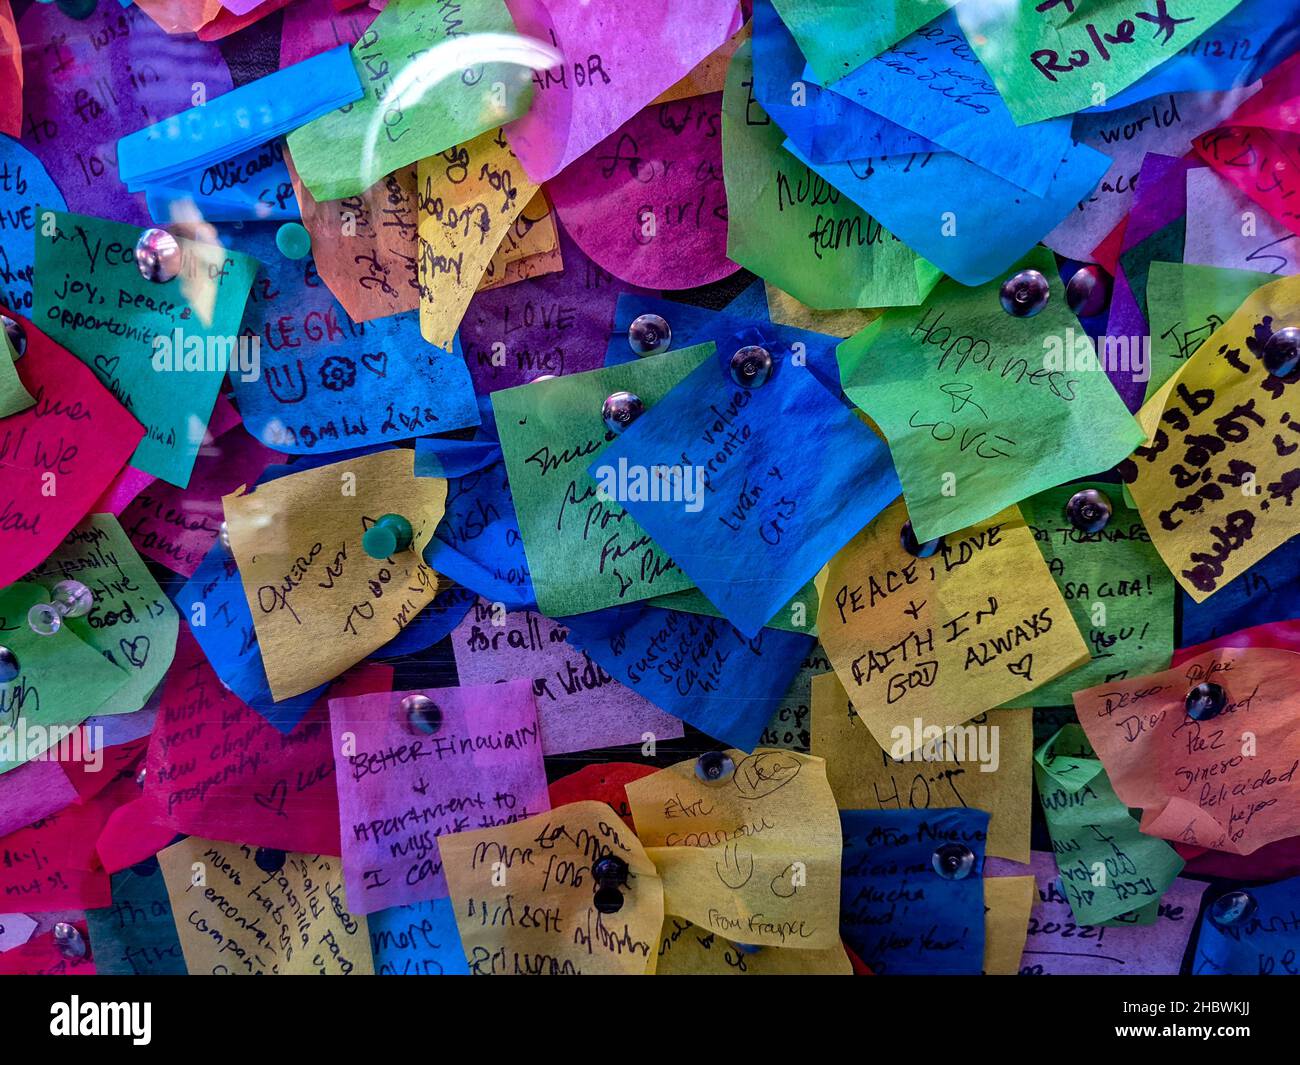 New Year's Eve Wishing Wall at Times Square in New York City on December 12, 2021. Stock Photo